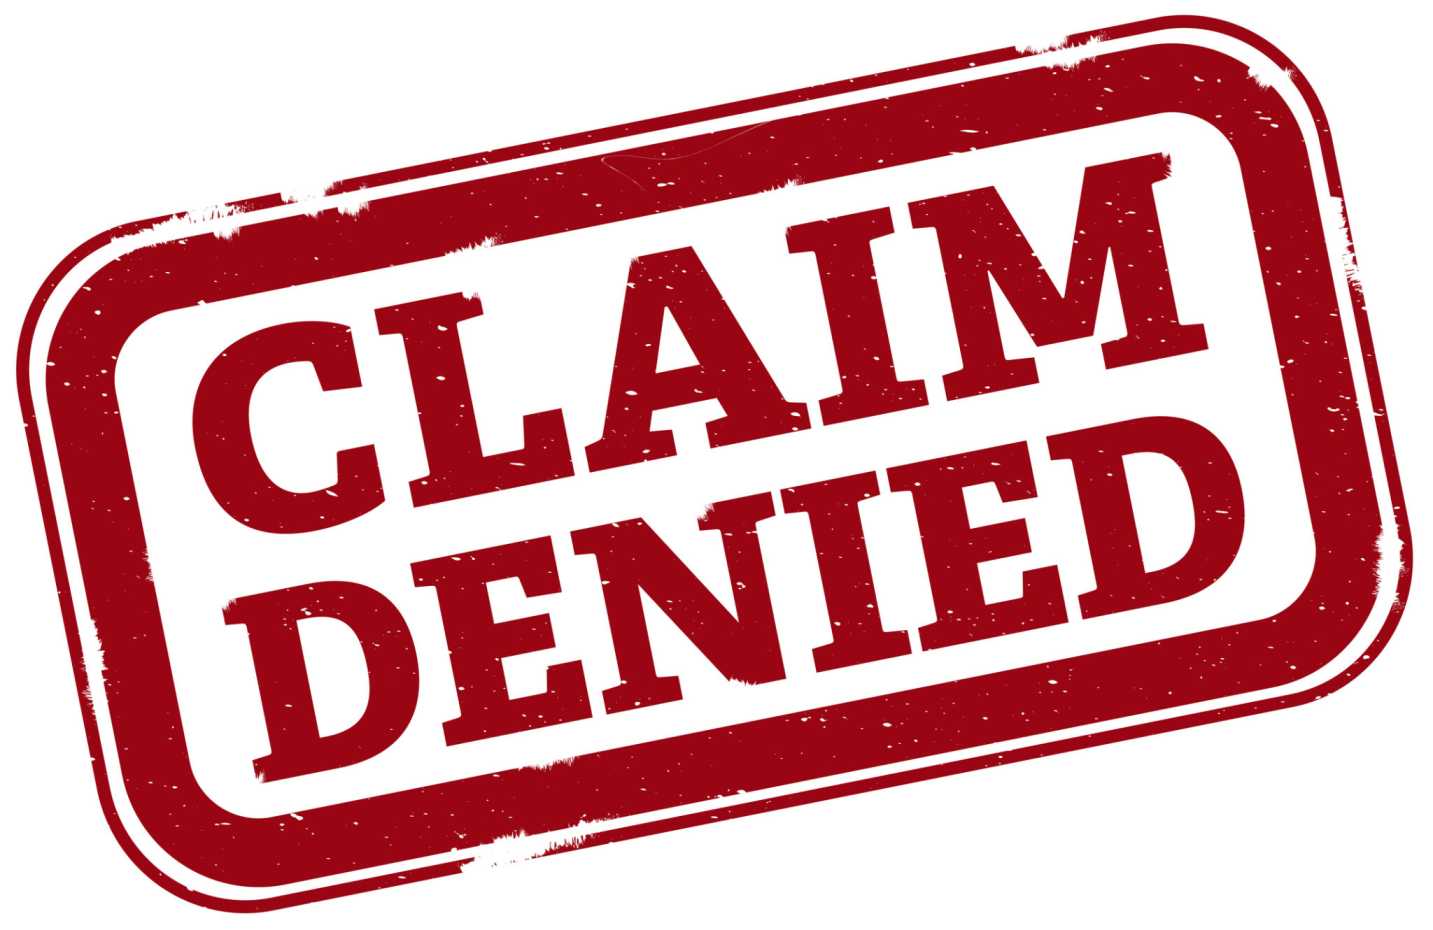 Federal workers comp claim denied in Maryland, USA